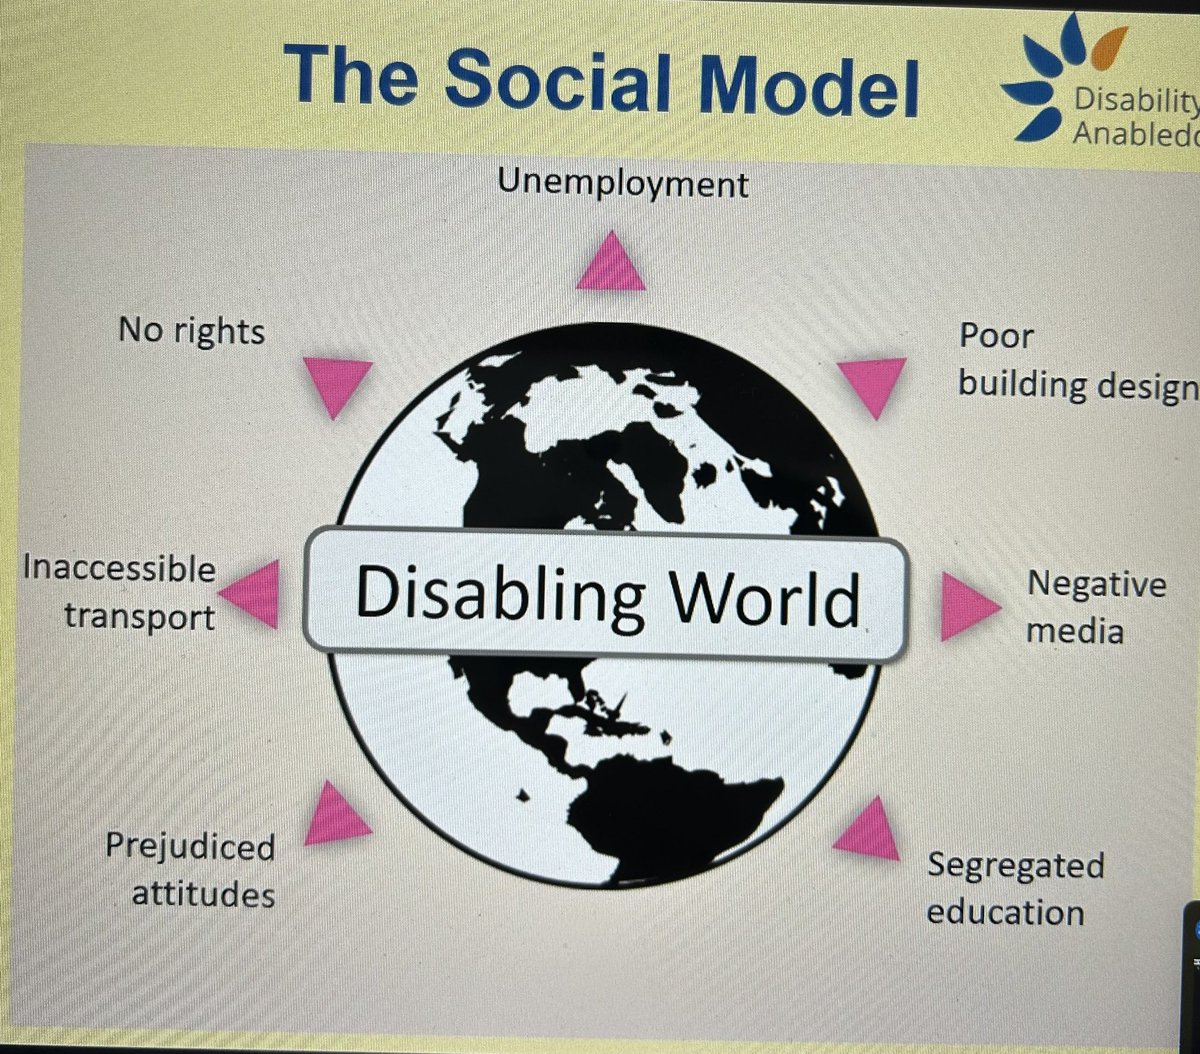 Thank you to @DisabilityWales for the #socialmodel of Disability presentation today.  

Such an important session. Everyone should attend. #inclusion #accessibility #wholesystem #equity